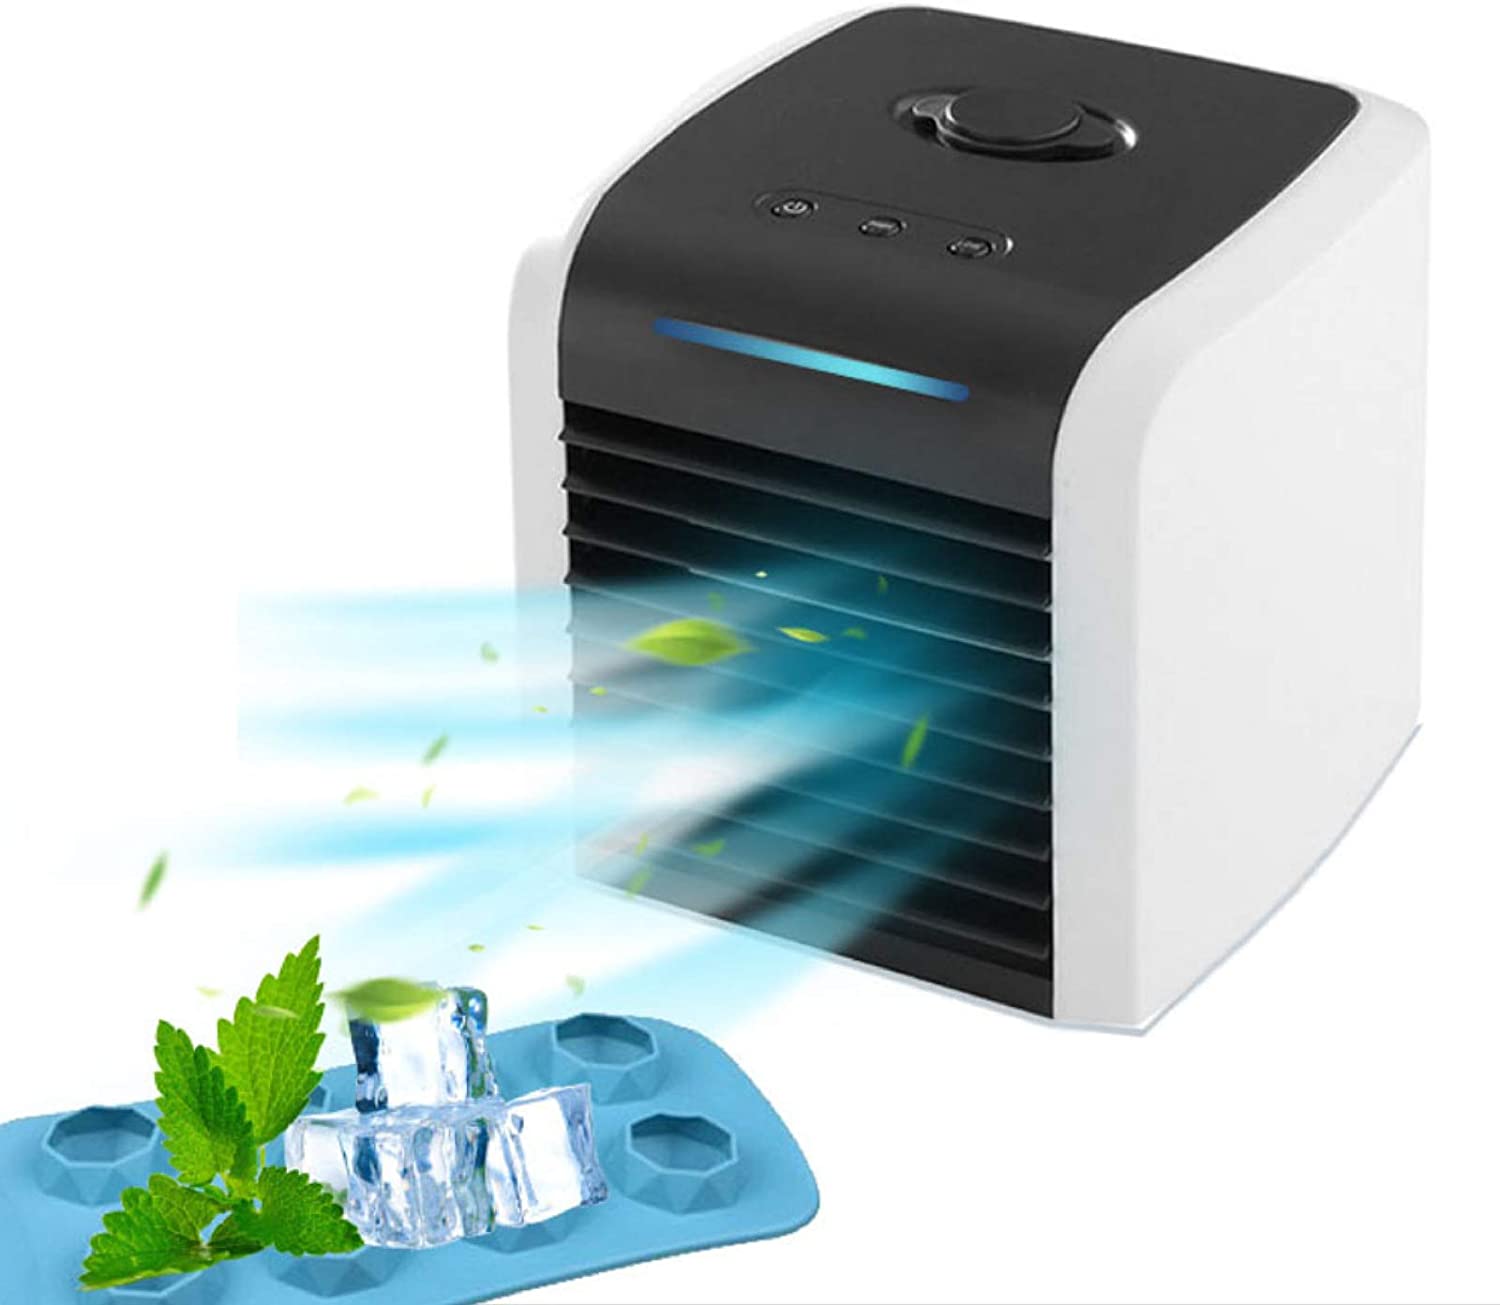 Tklake Portable Water-cooled Air Conditioner